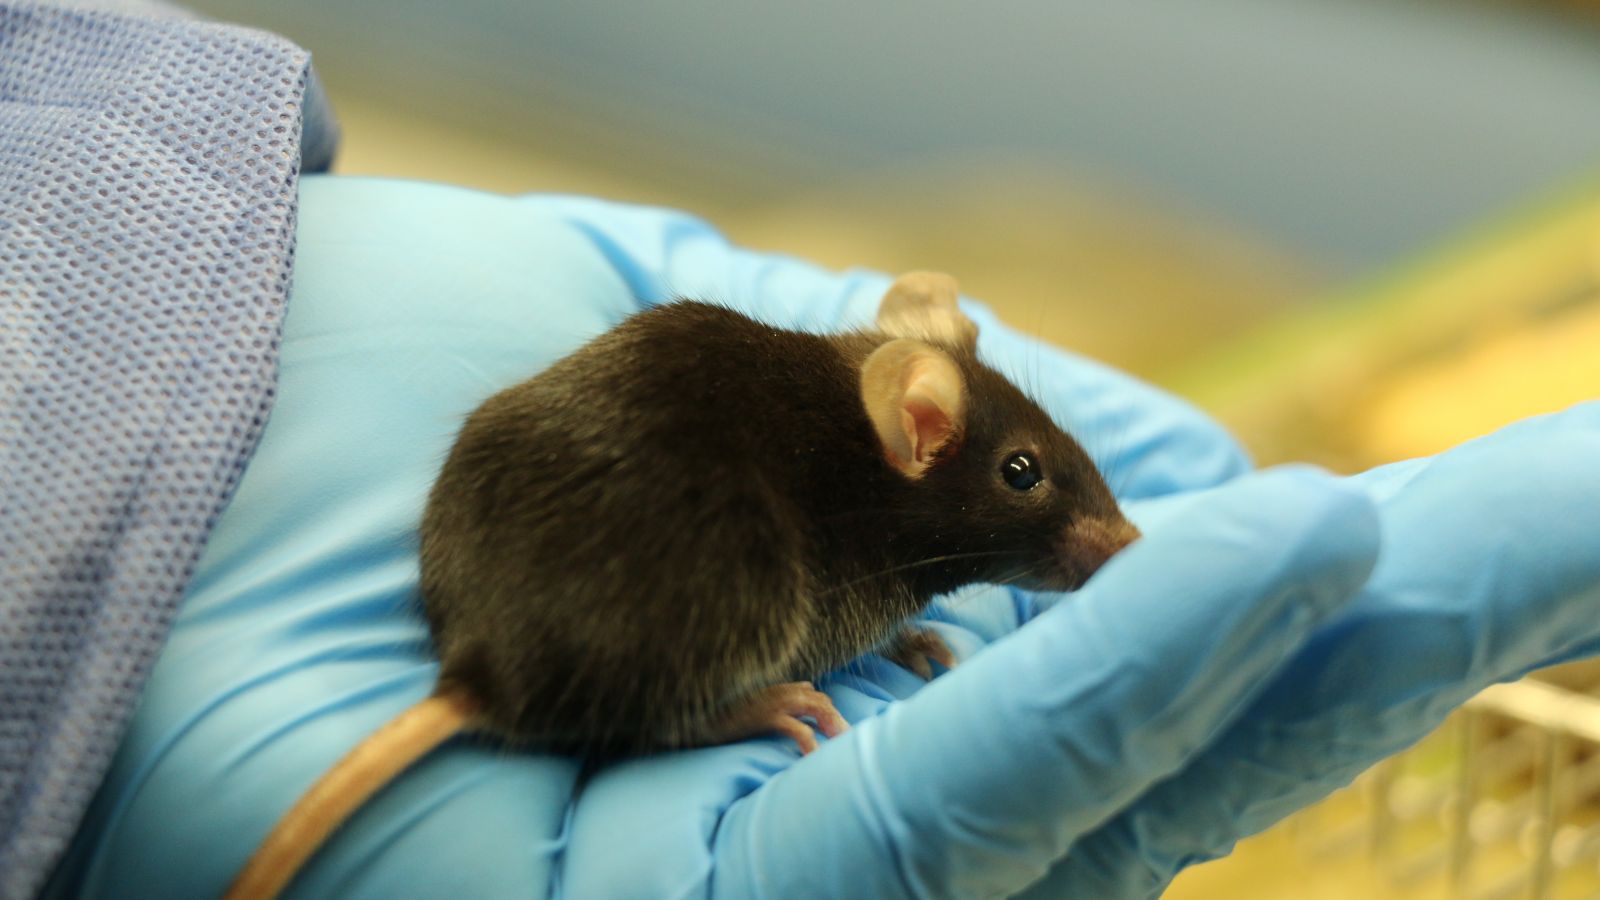 Mice in medical research